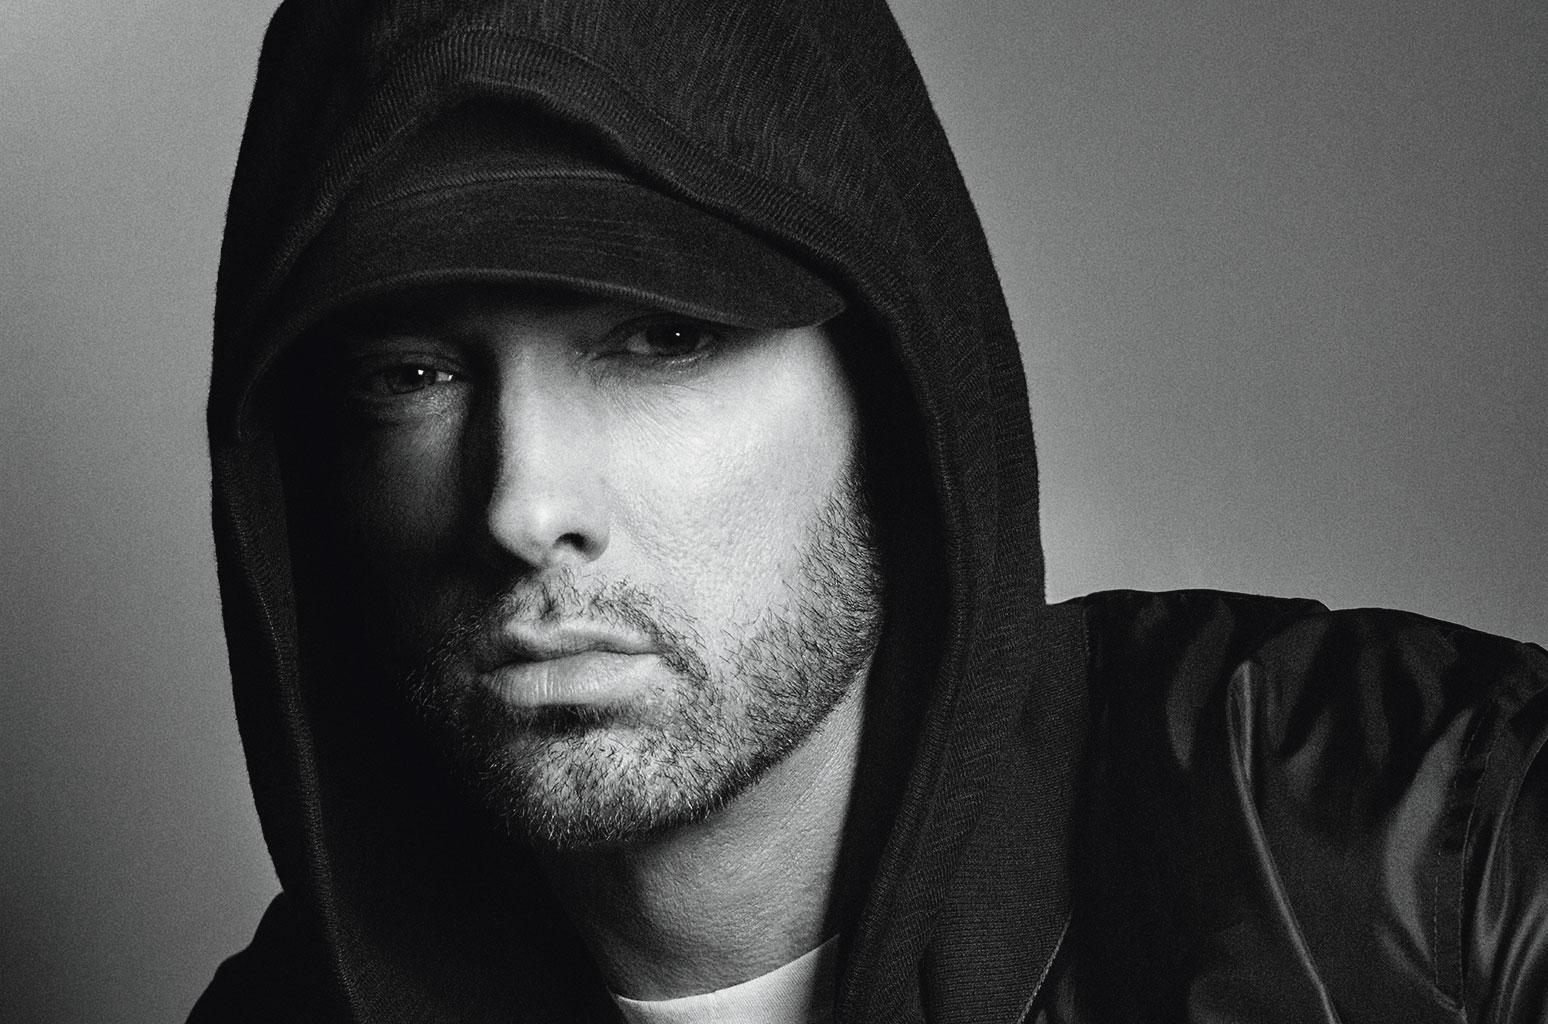 Billboard 200 Albums Chart: Eminem's 'Music To Be Murdered